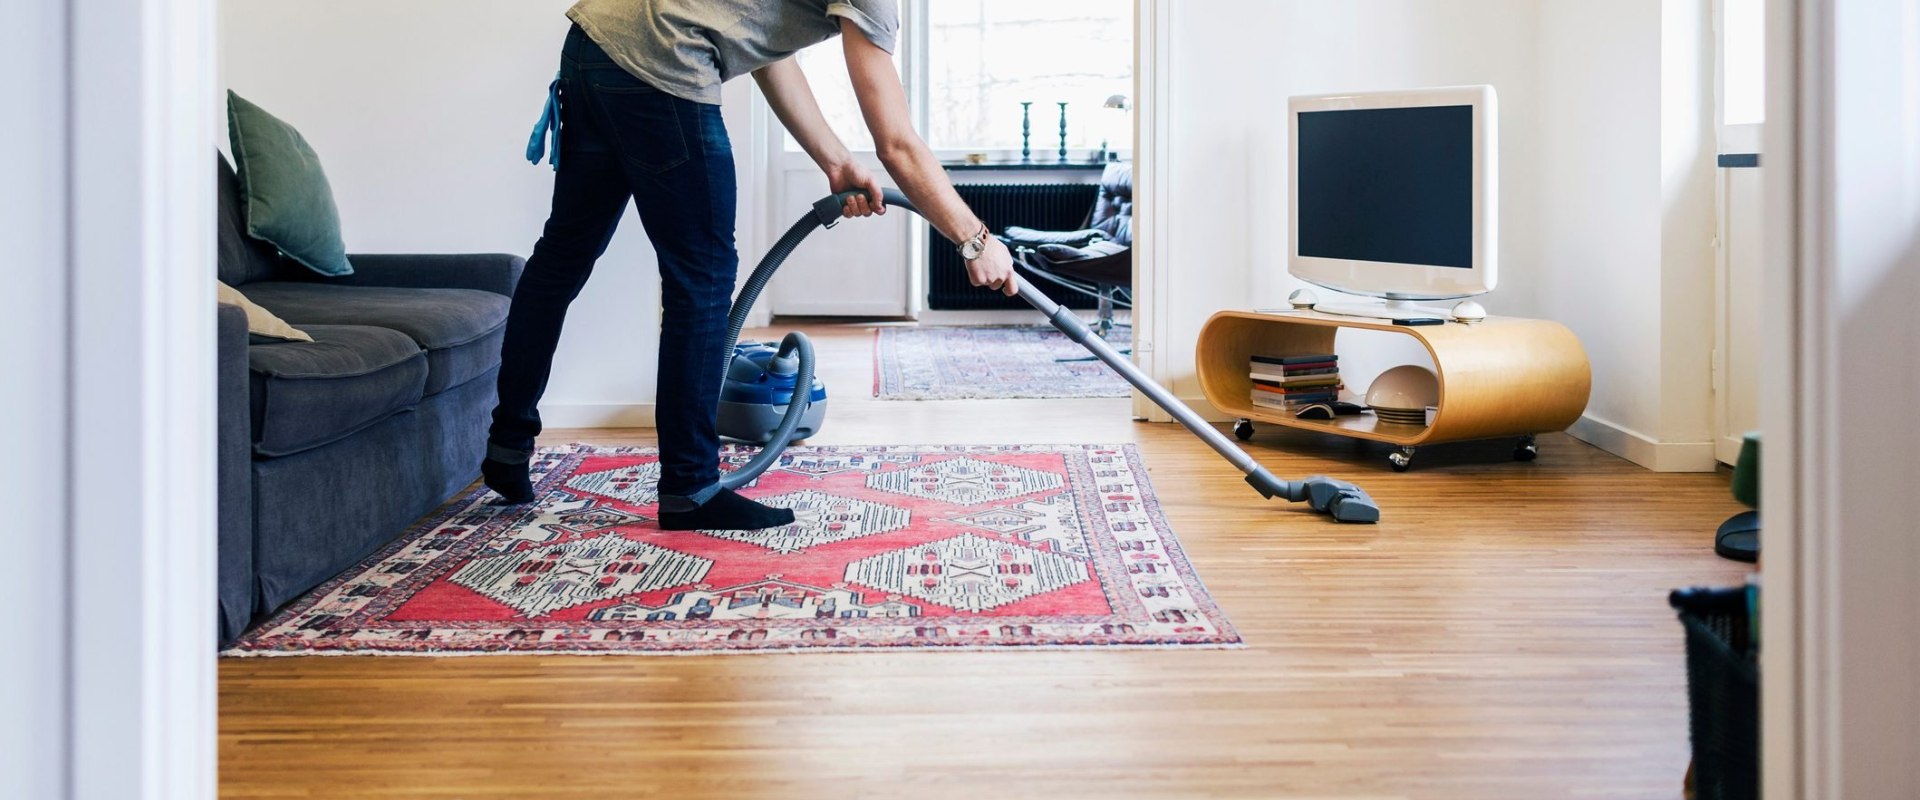 What is the correct order of cleaning a house?